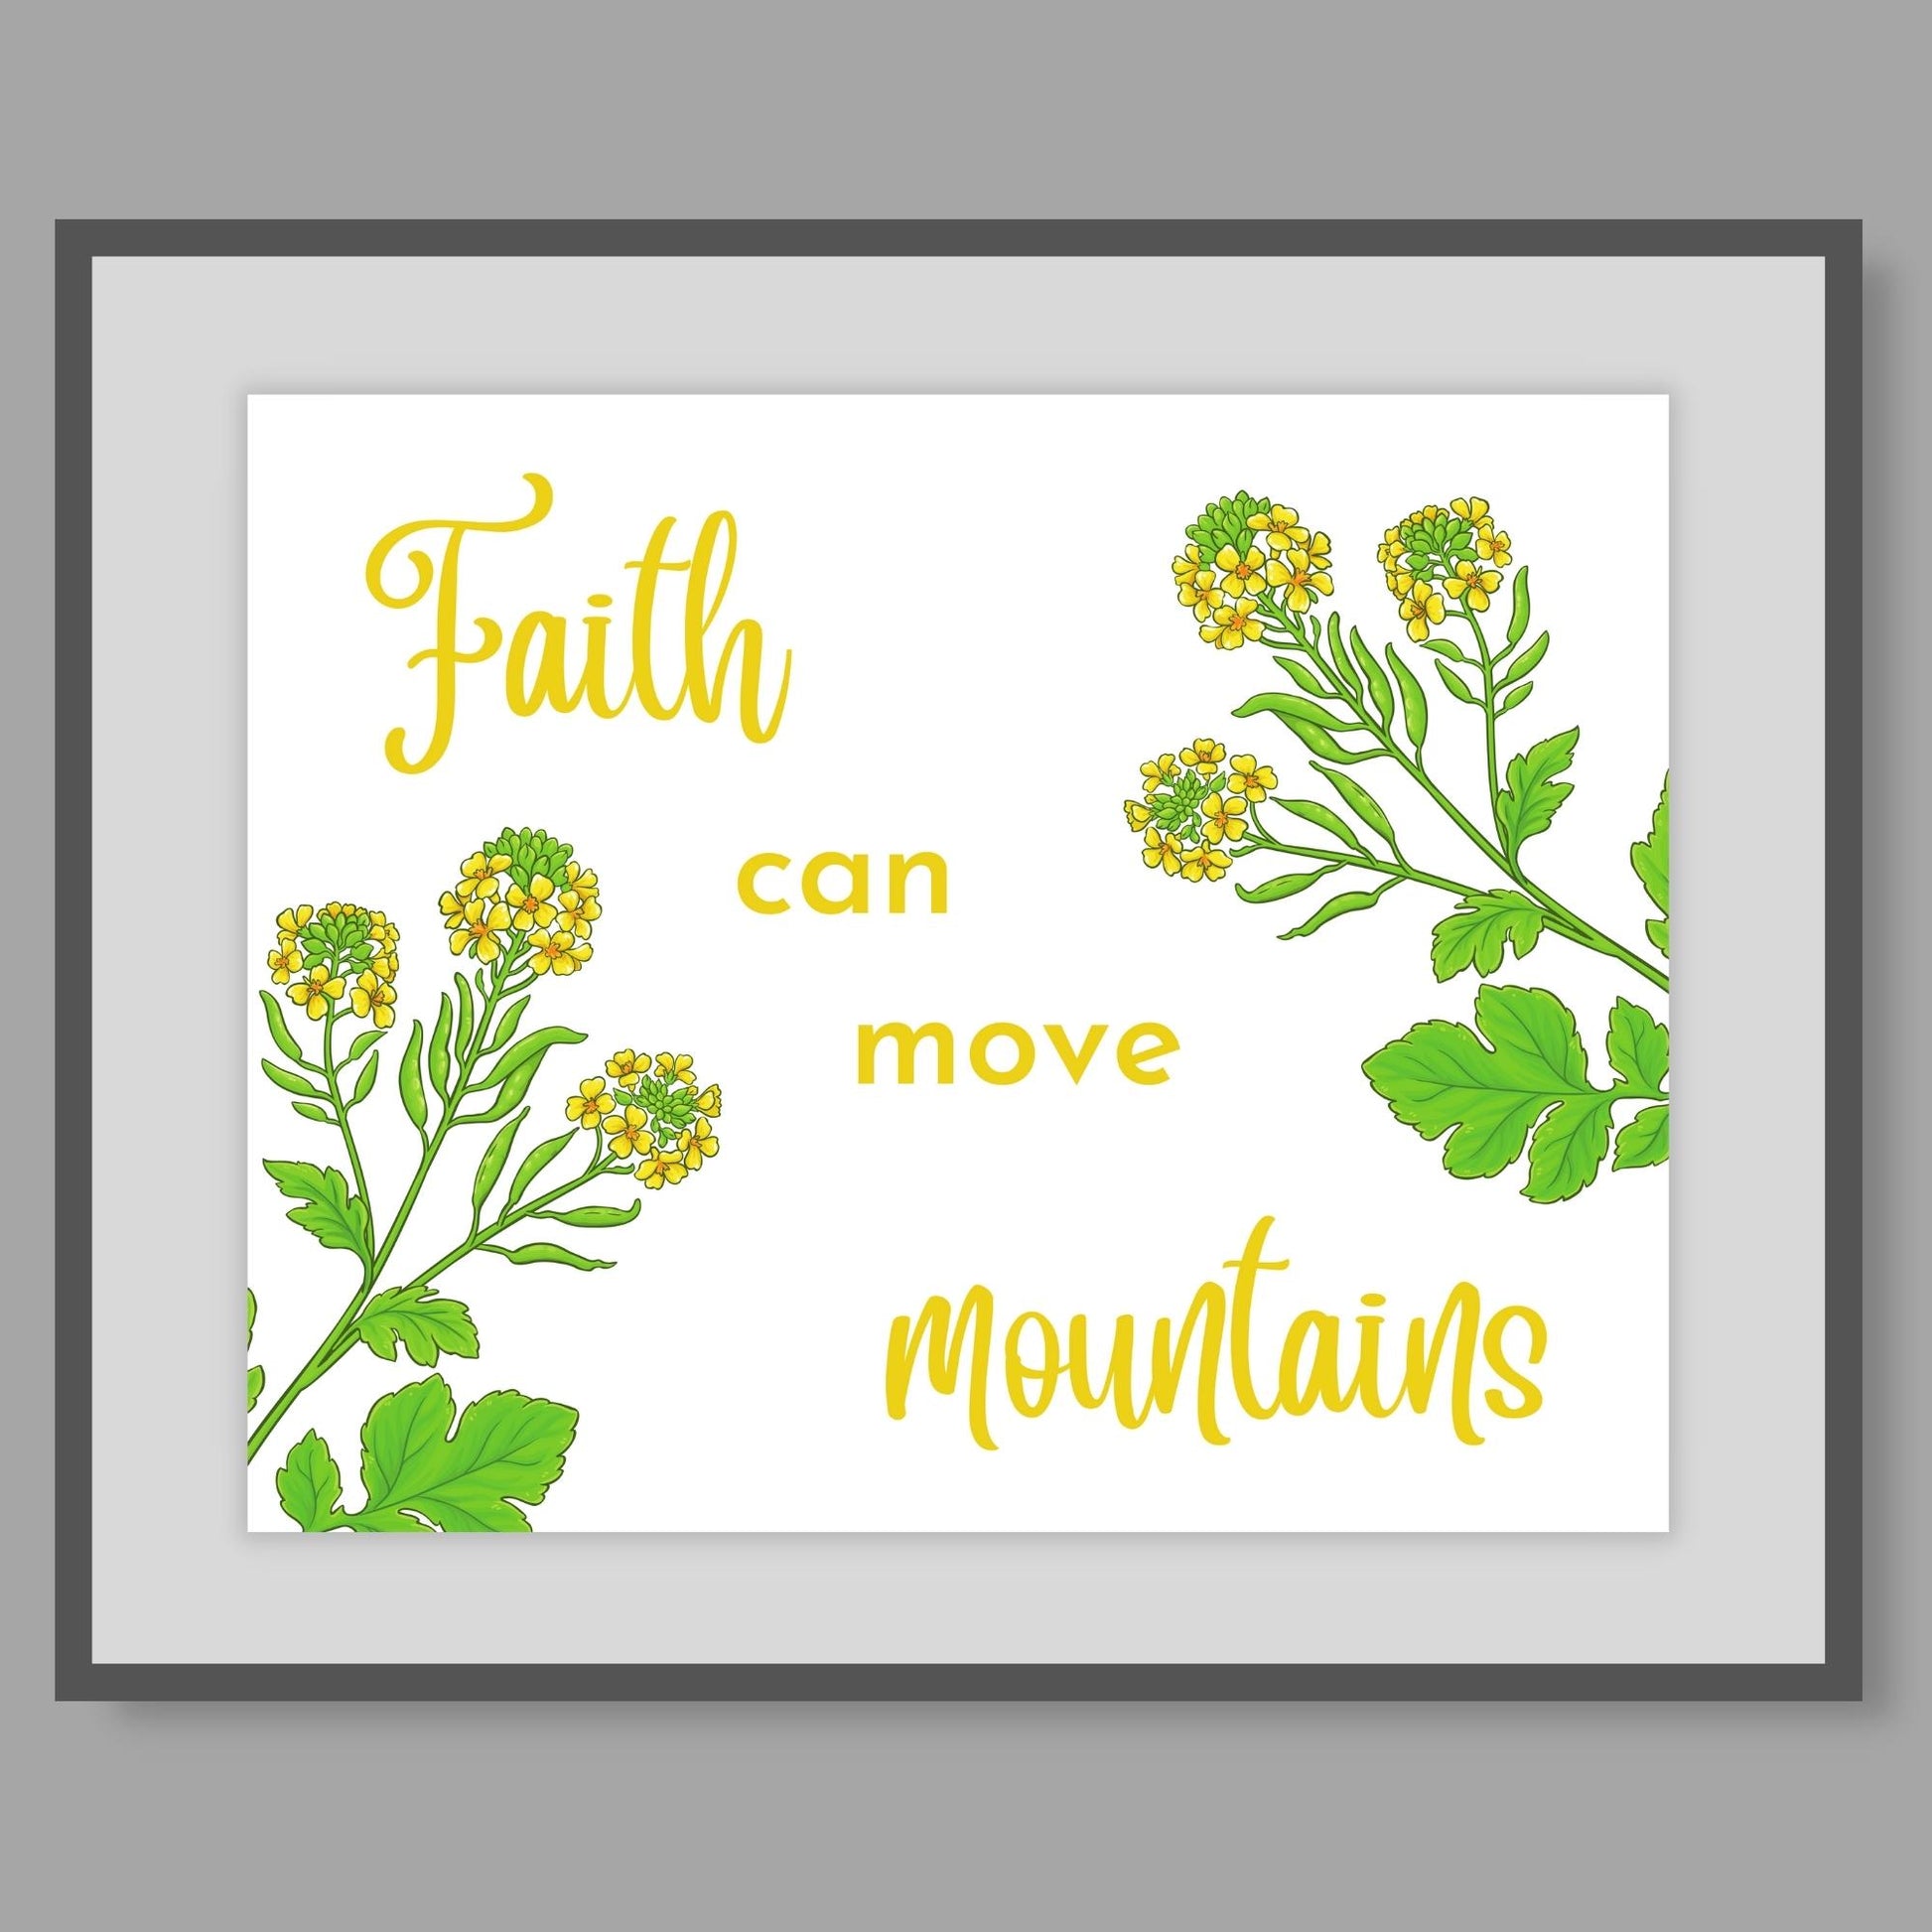 Inspirational Word Art - Faith can move mountains - Mustard Seed Floral Design Wall Decor (8x10 print) | shown in grey frame | oak7west.com